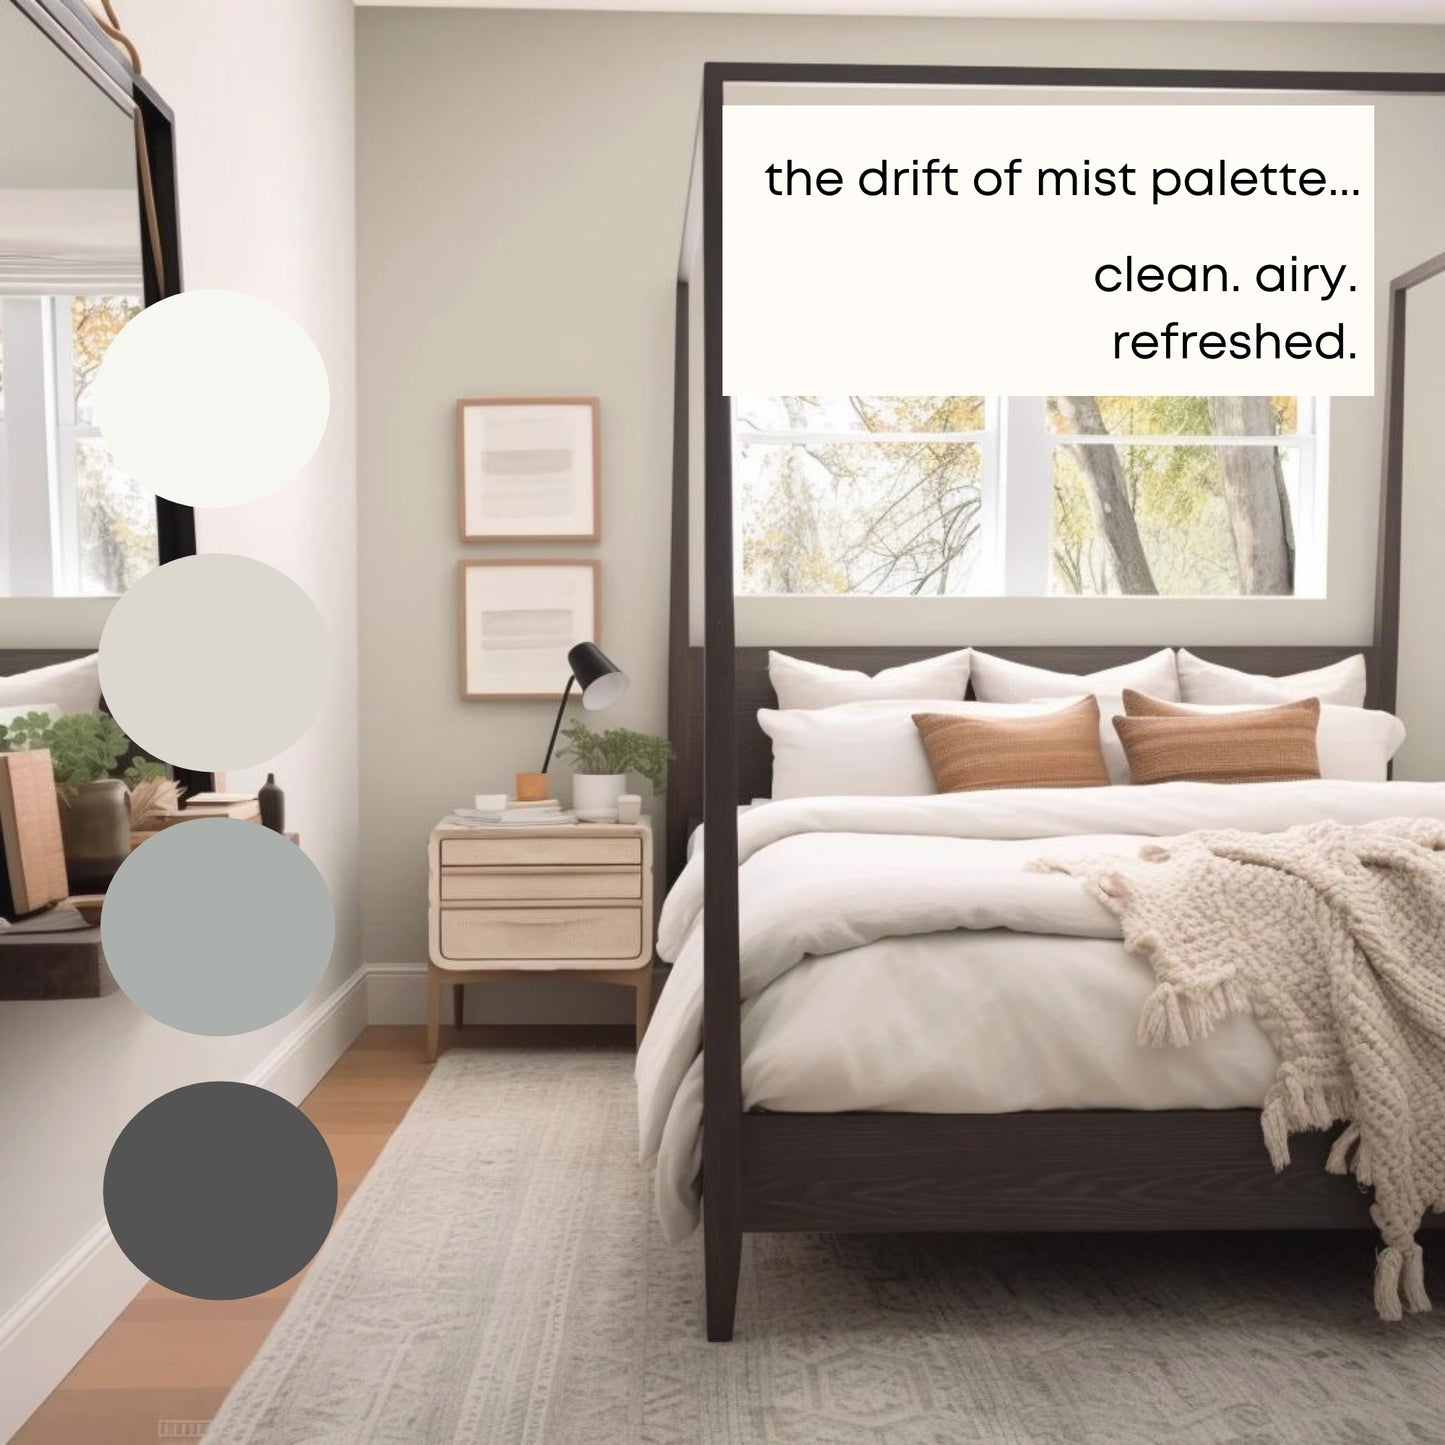 Drift of Mist Sherwin Williams Paint Palette - Modern Neutral Interior Paint Colors for Home - Coastal Interior Design Color Palette, Sherwin Williams Iron Ore